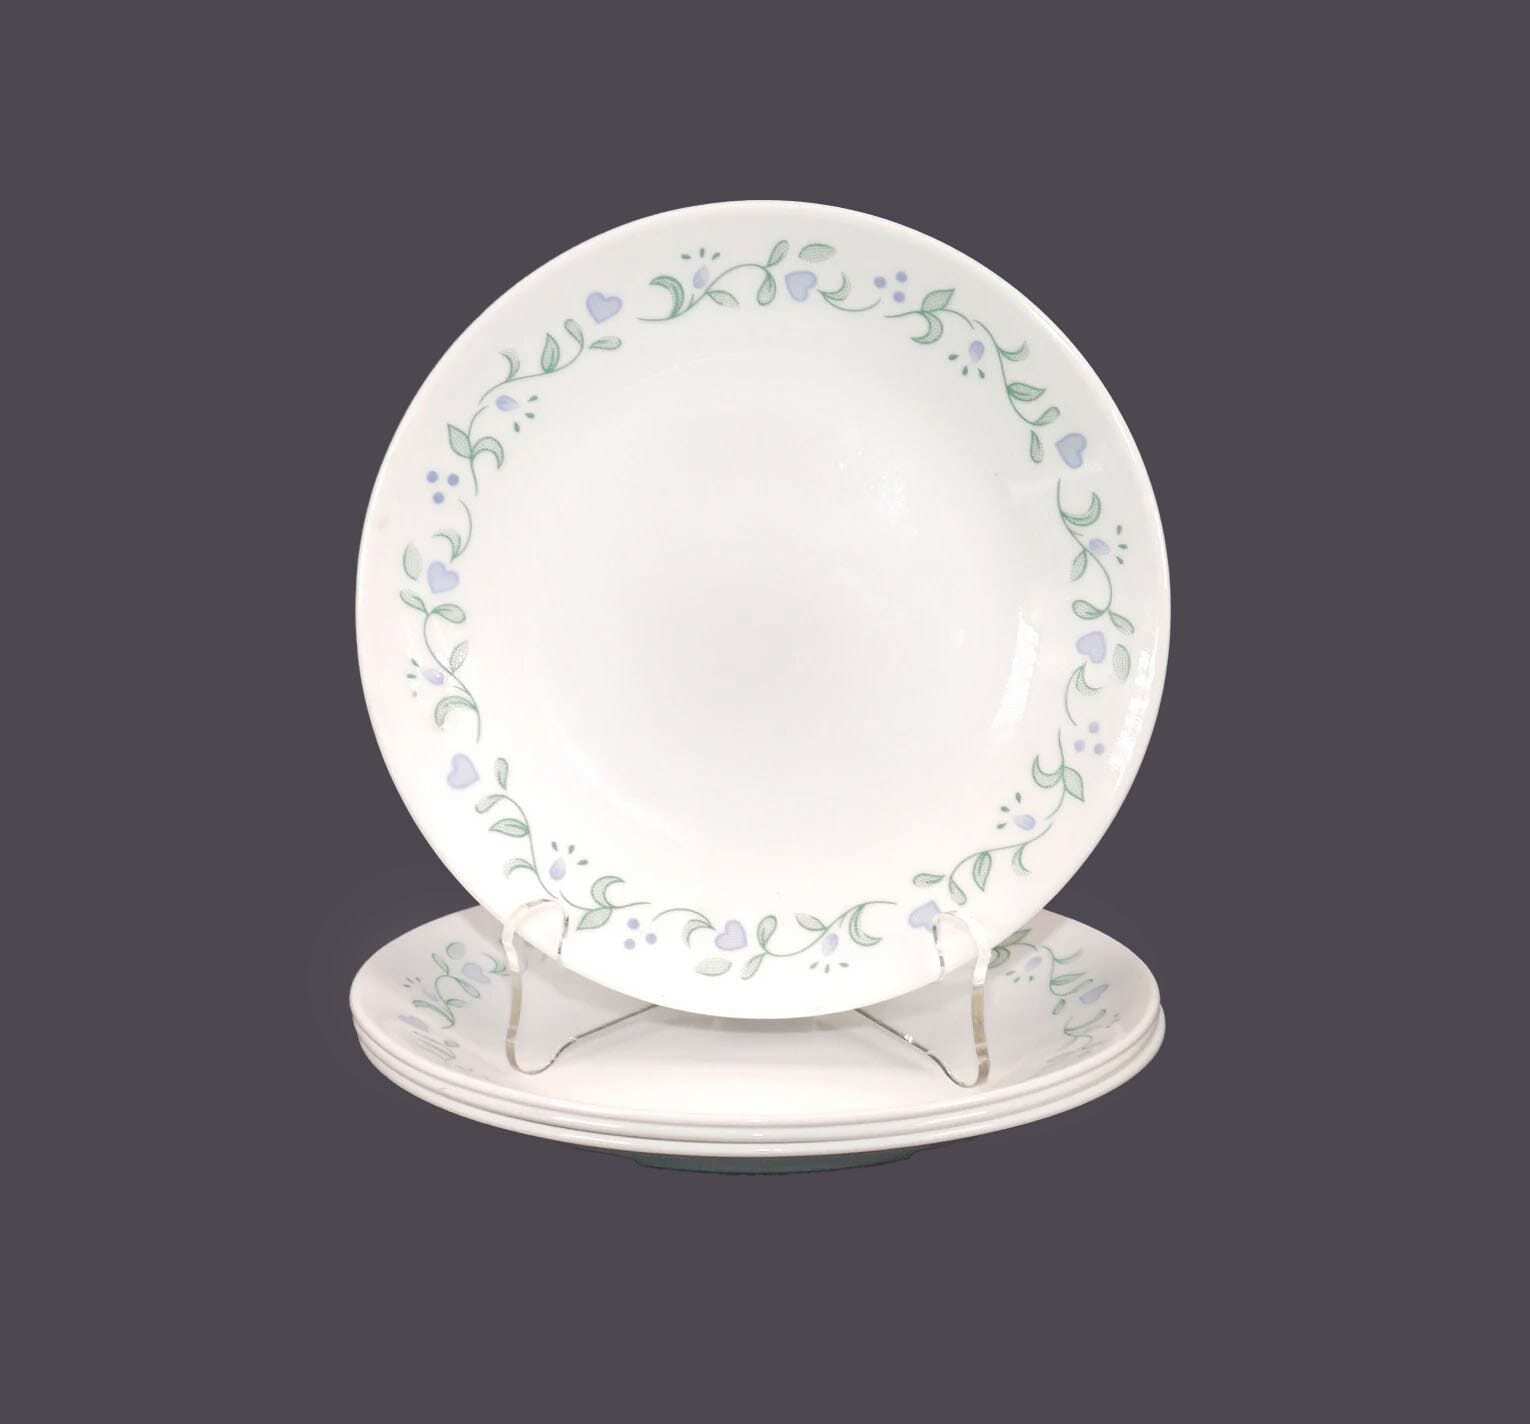 Corelle Country Cottage bread plates. Vintage Corningware made in the USA. - $45.31 - $53.56